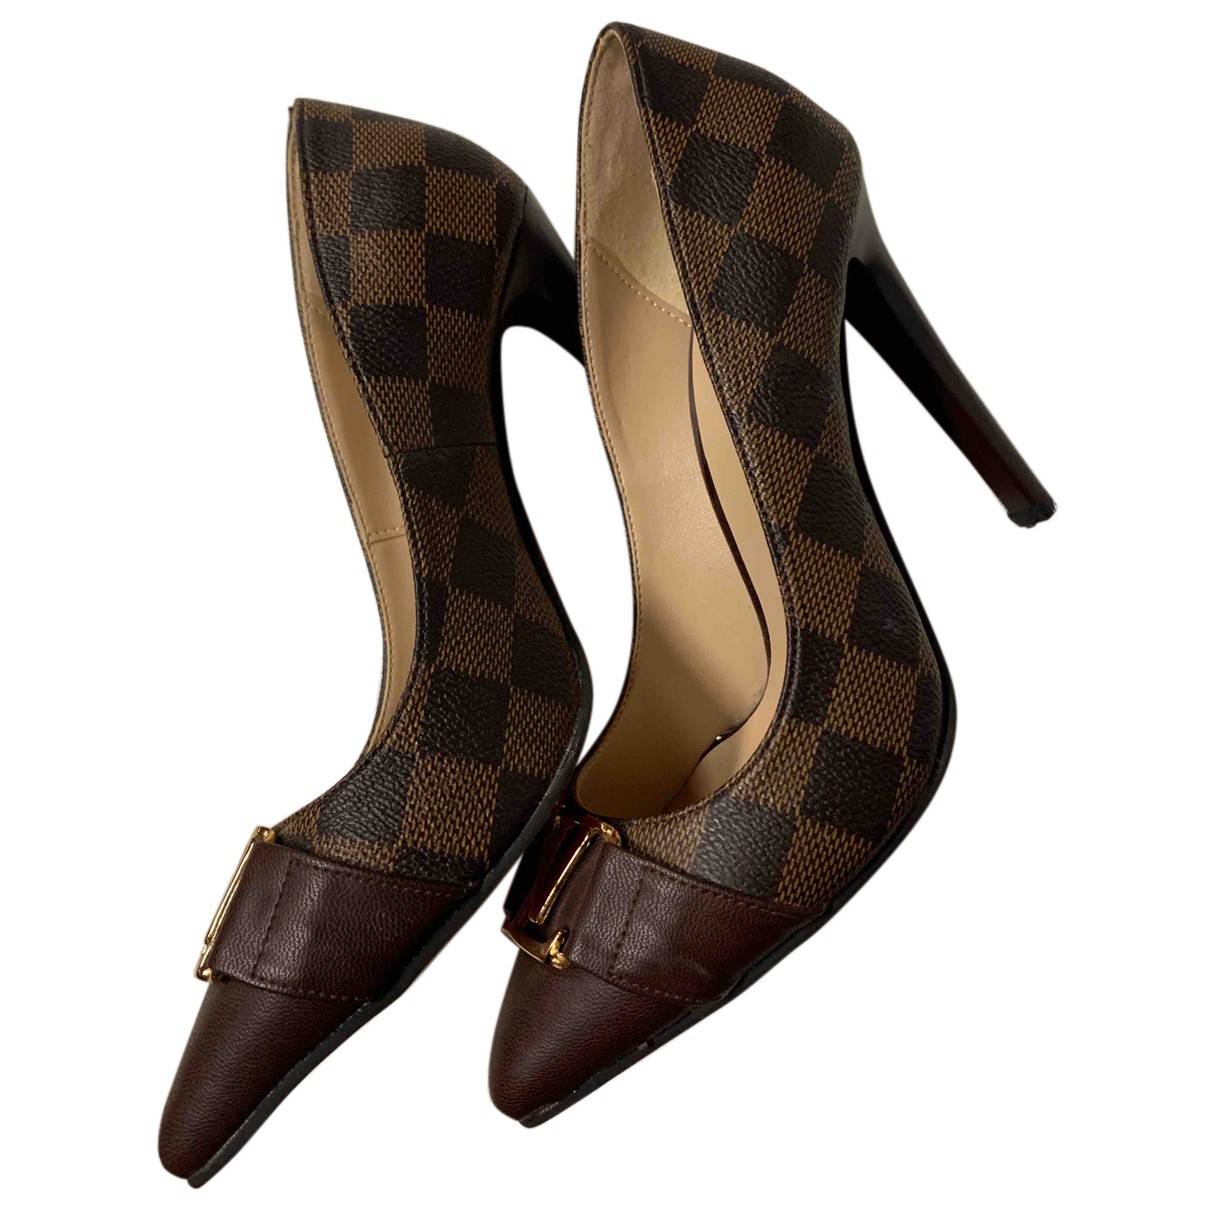 Louis Vuitton High Heel With Bow 